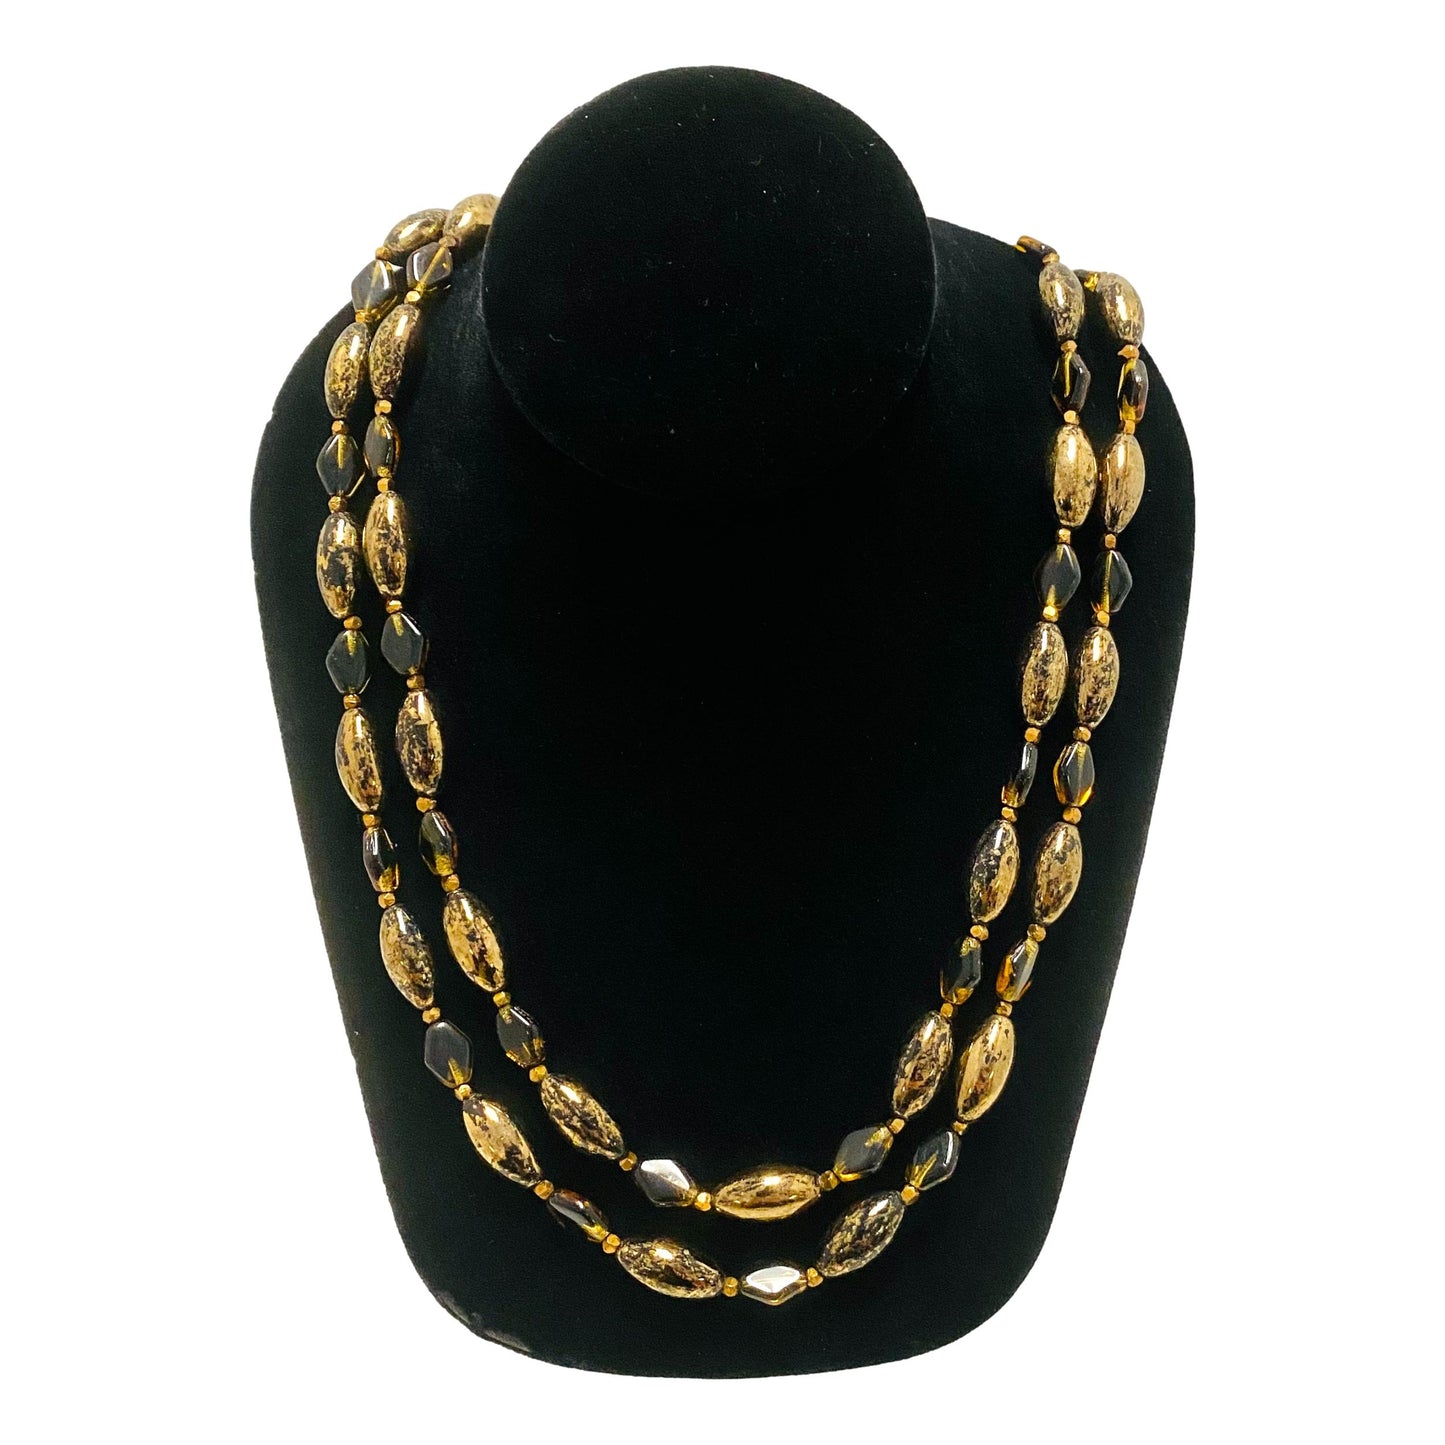 Black & Gold Glass Bead Necklace